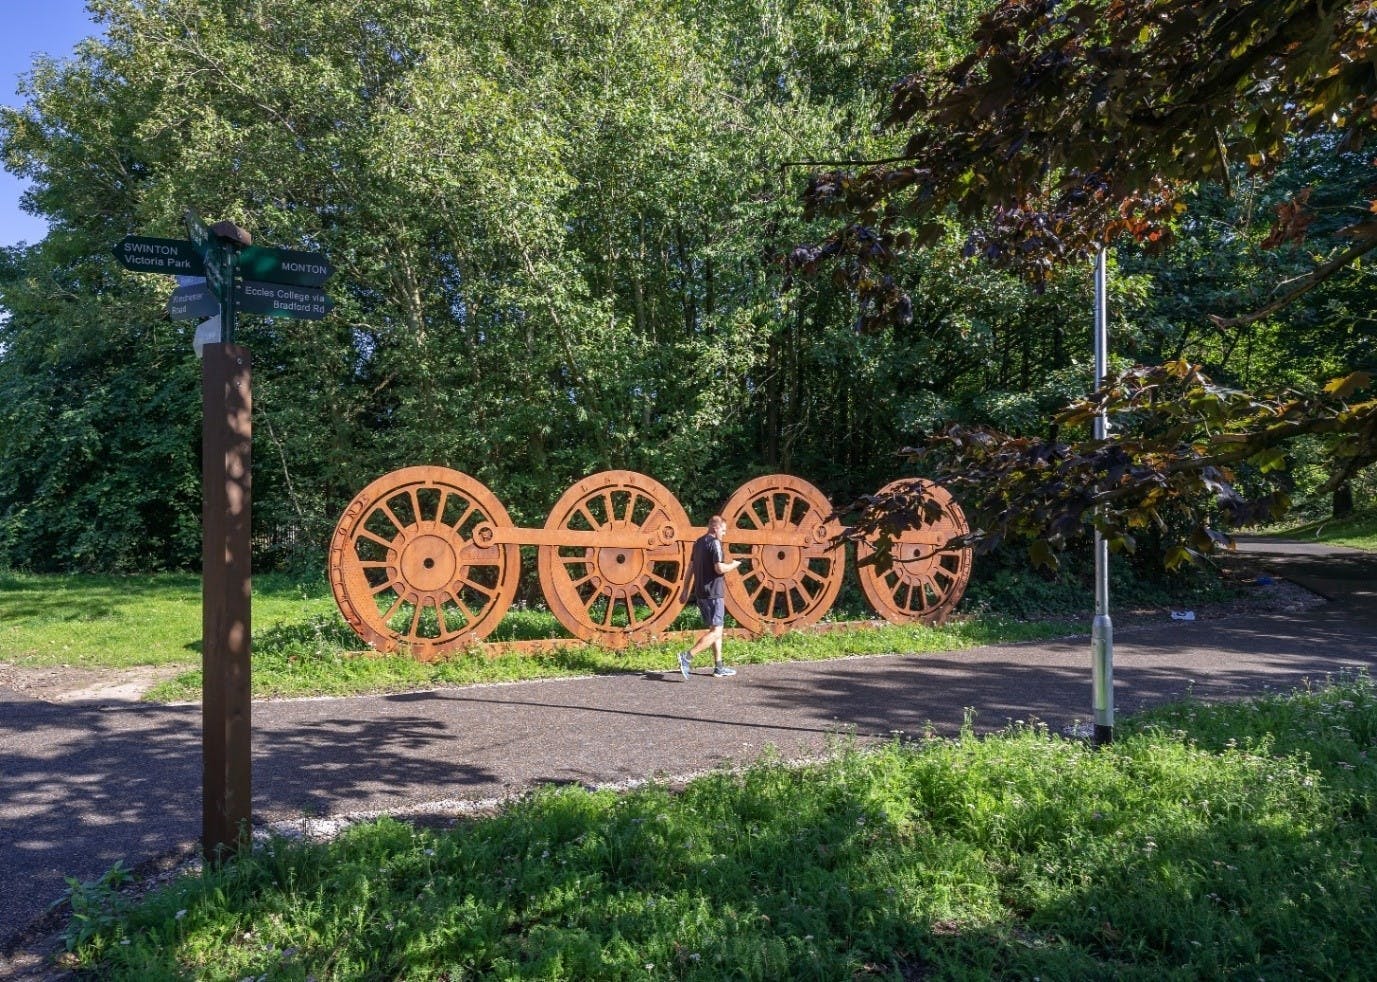 Image of a park with an old set of train wheels visible and a man running.